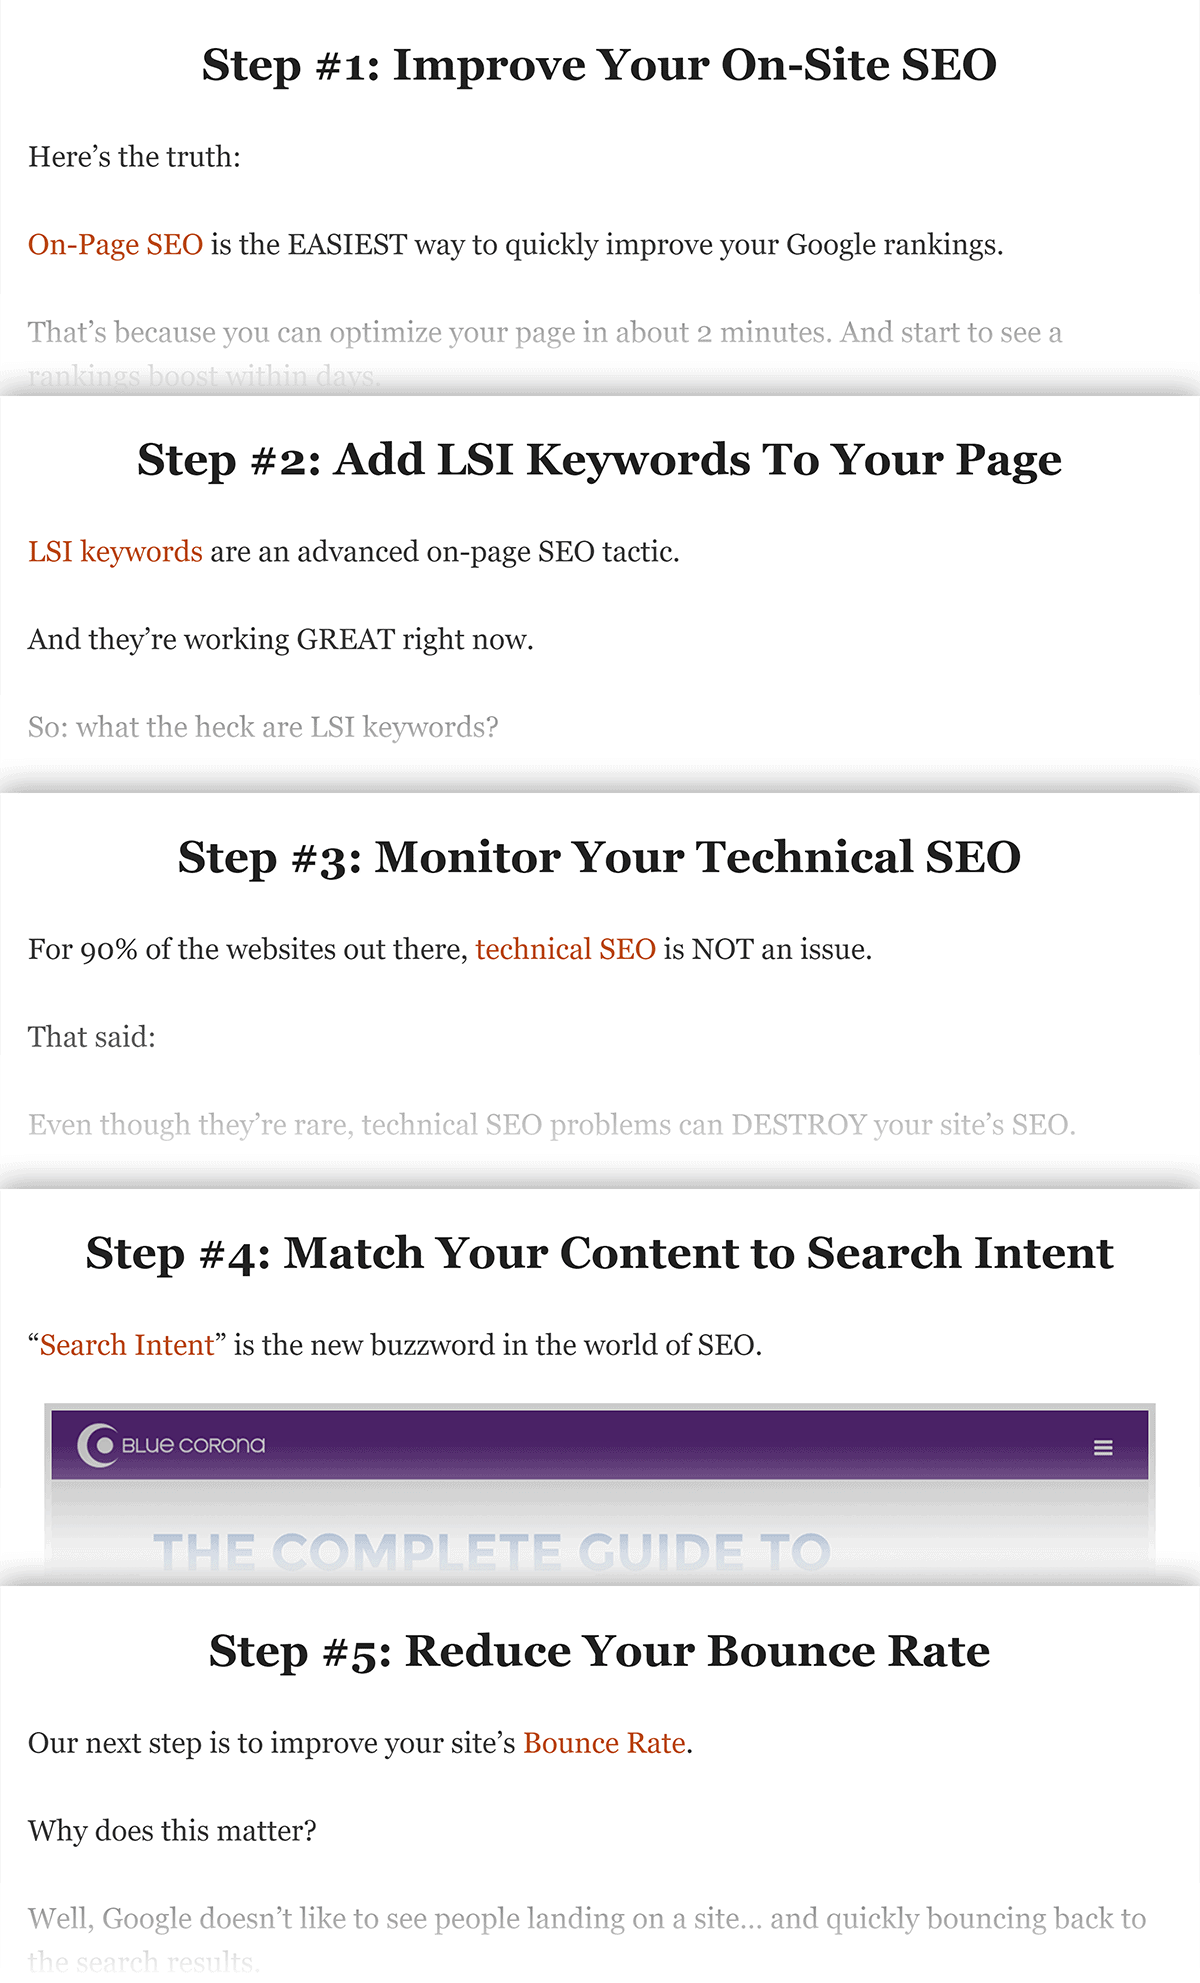 Consistent page structure on Backlinko post